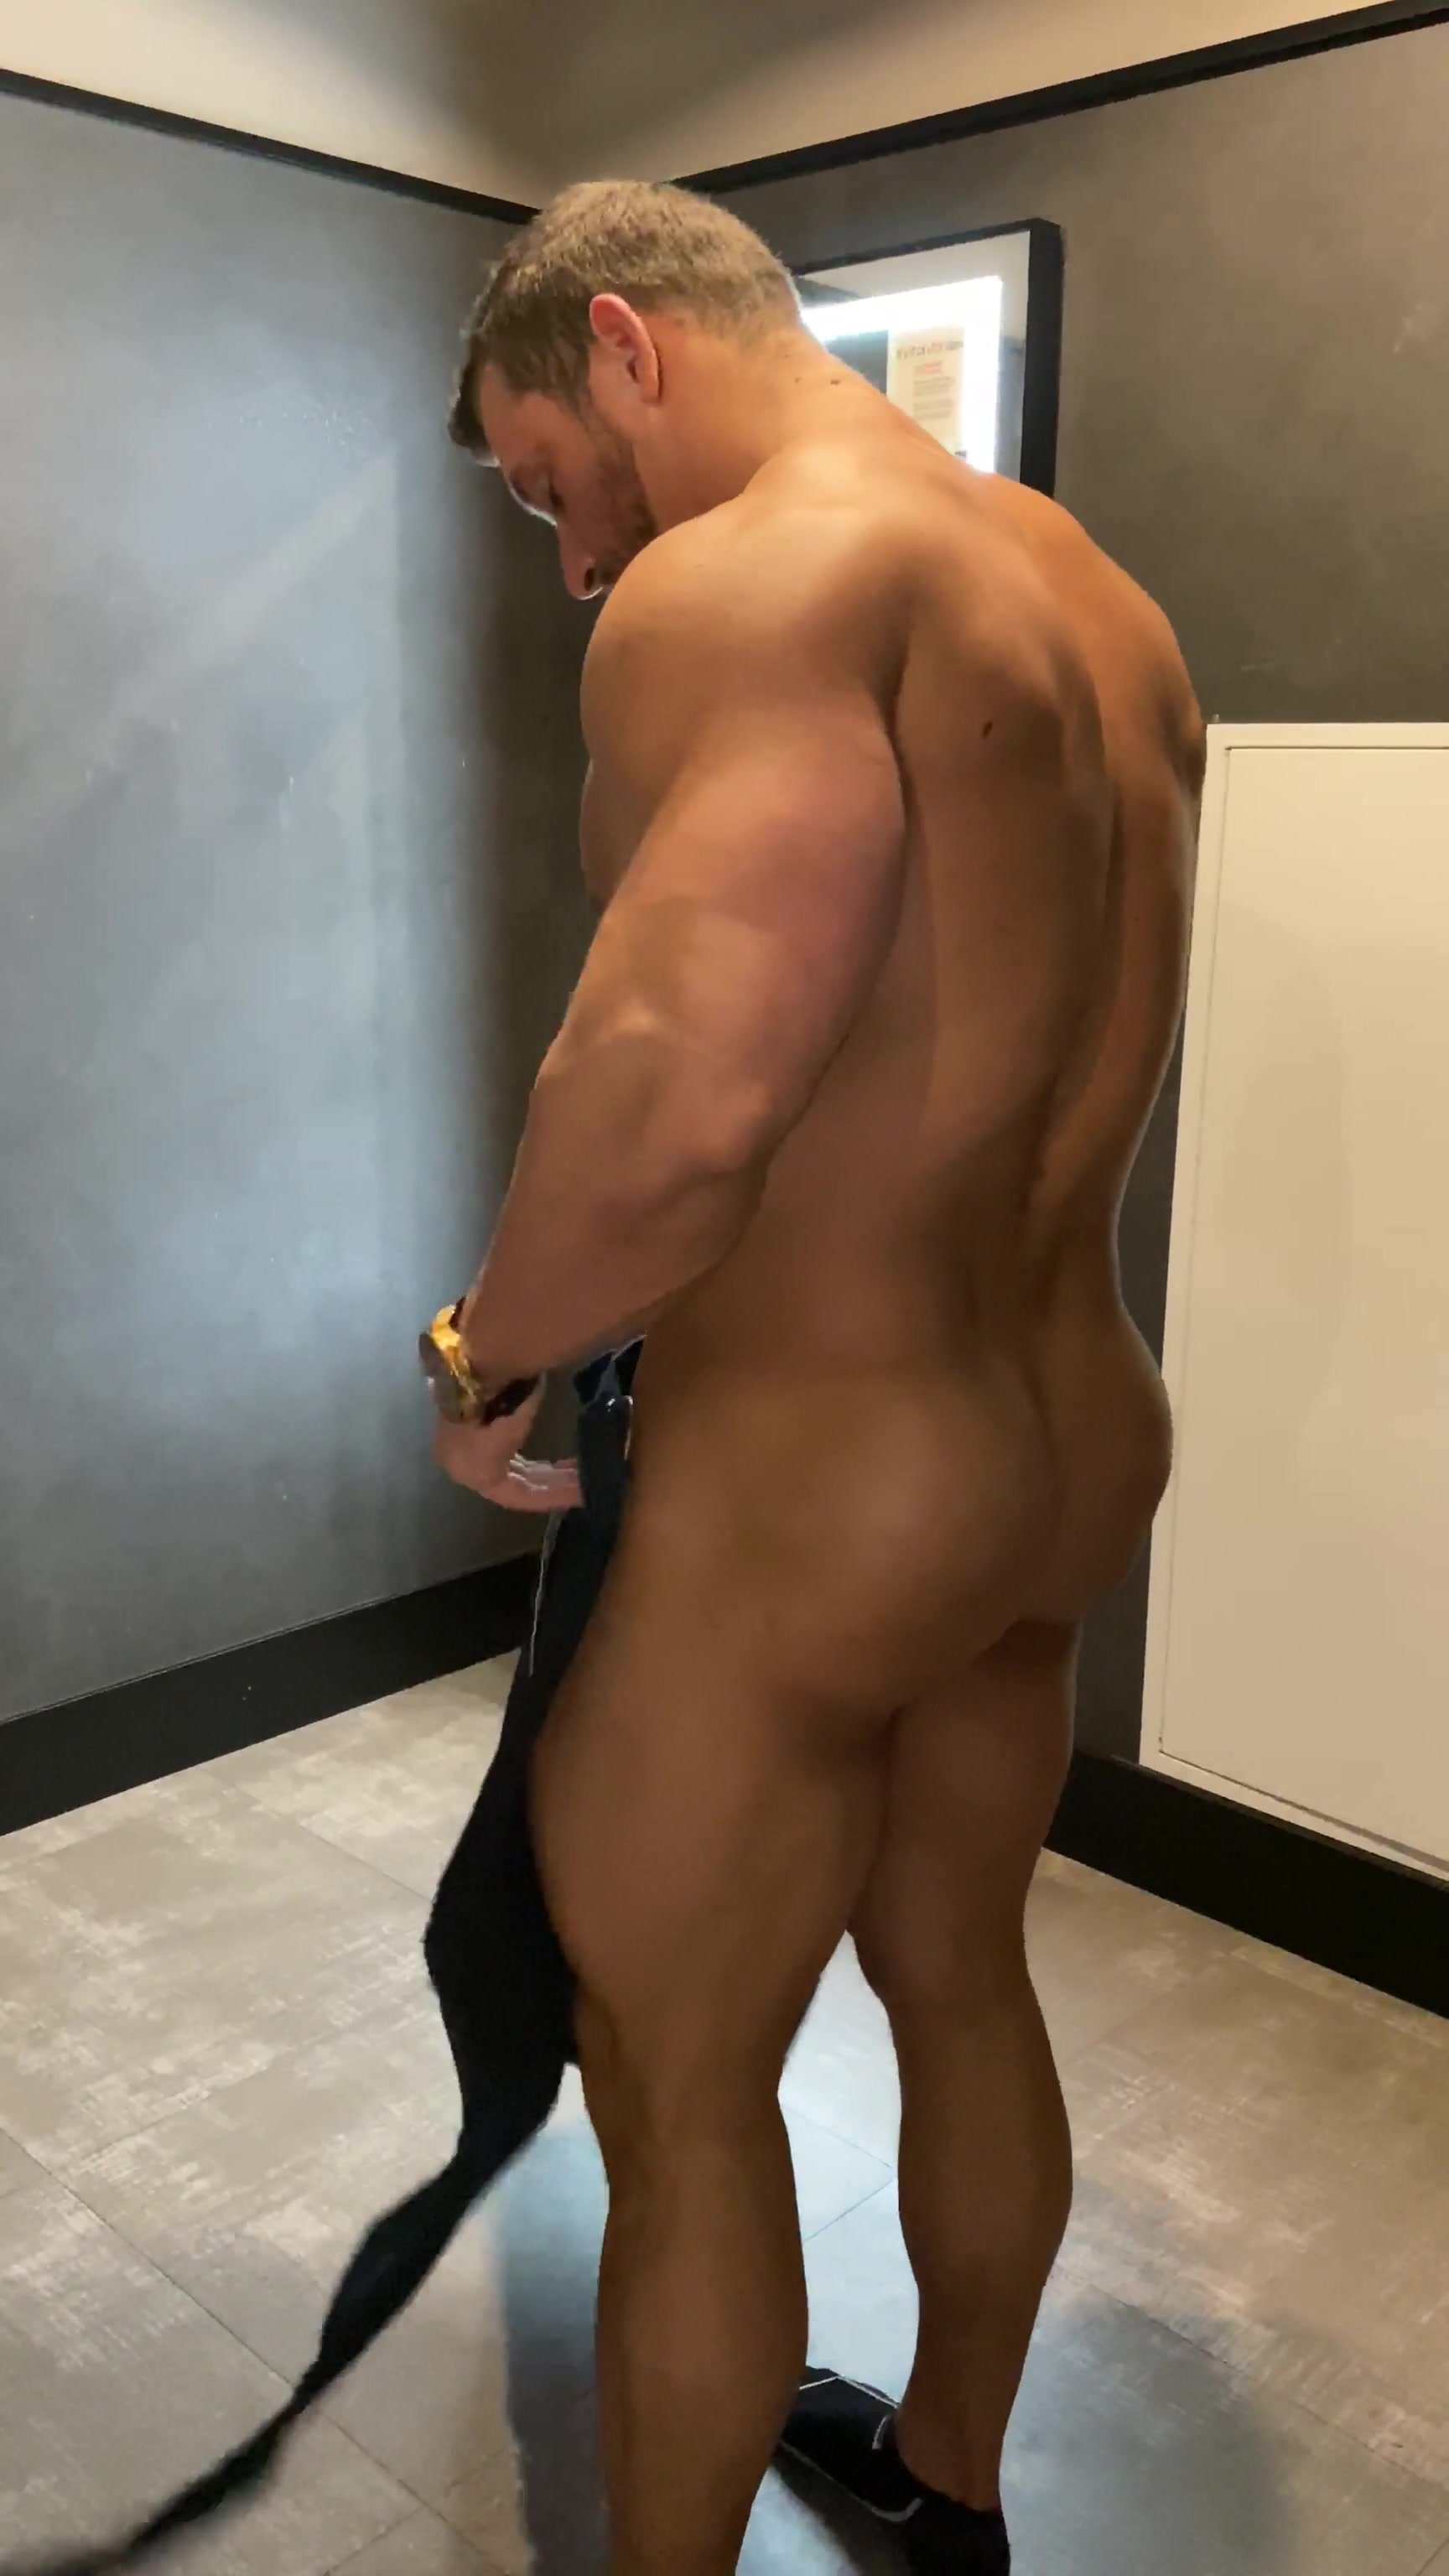 Muscle hunk - video 58 - ThisVid.com